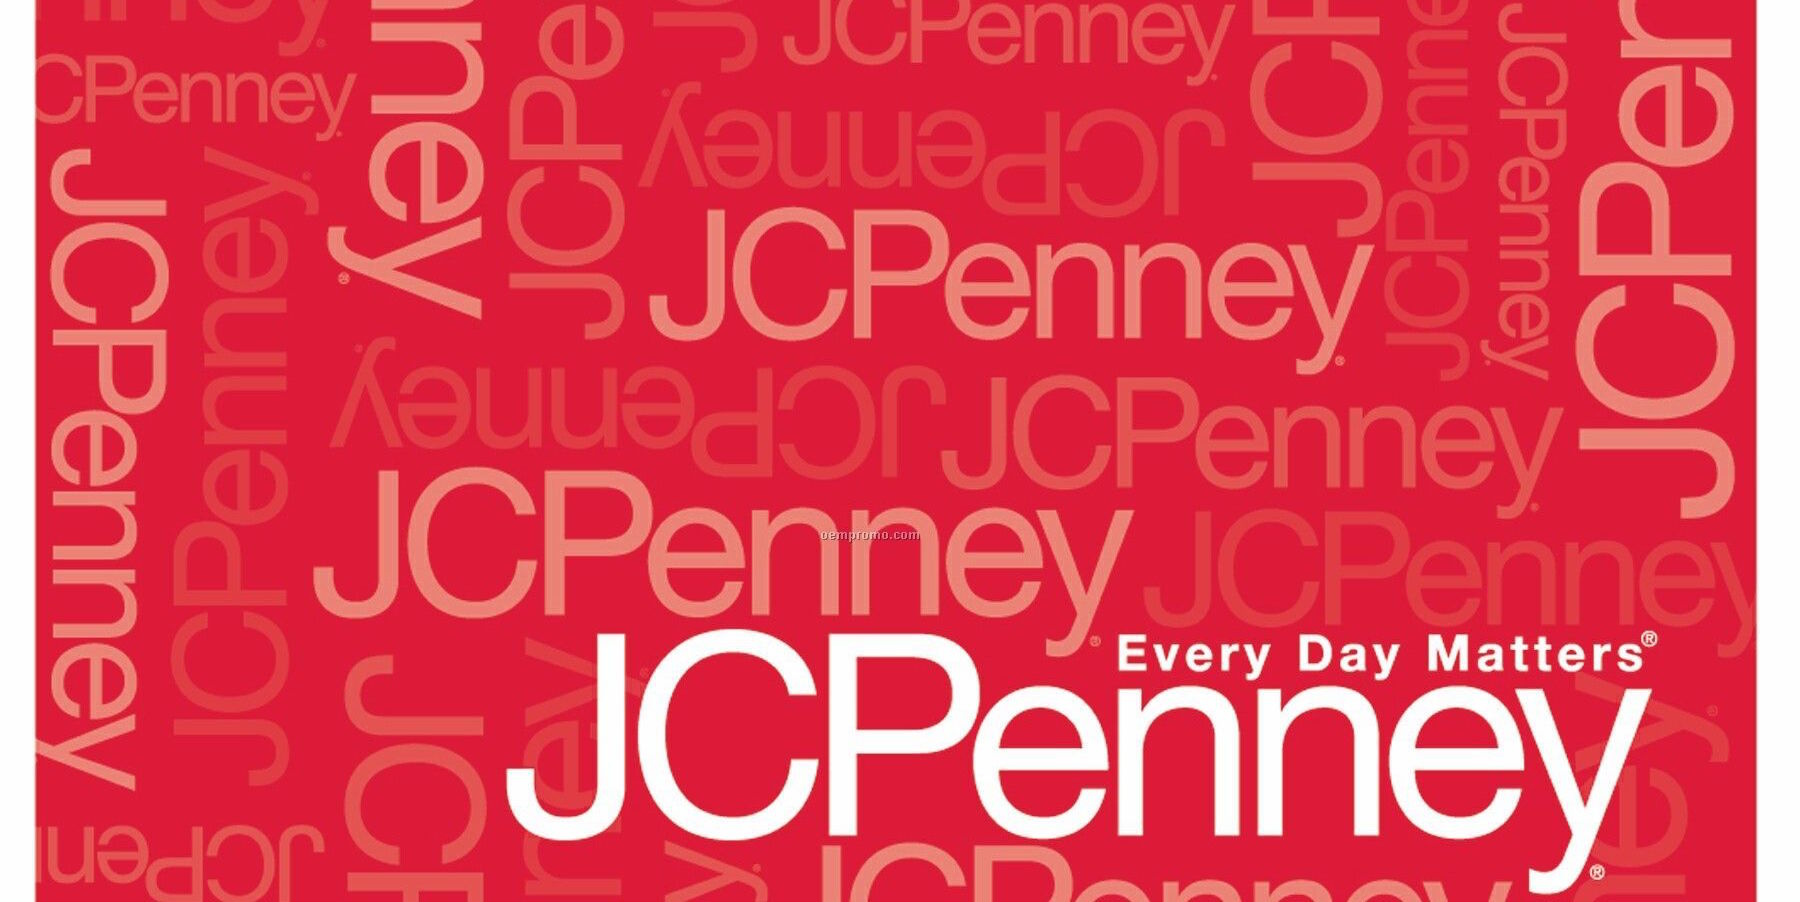 Can I use my JCPenney's giftcard for Sephora? How can I best use it? - Quora